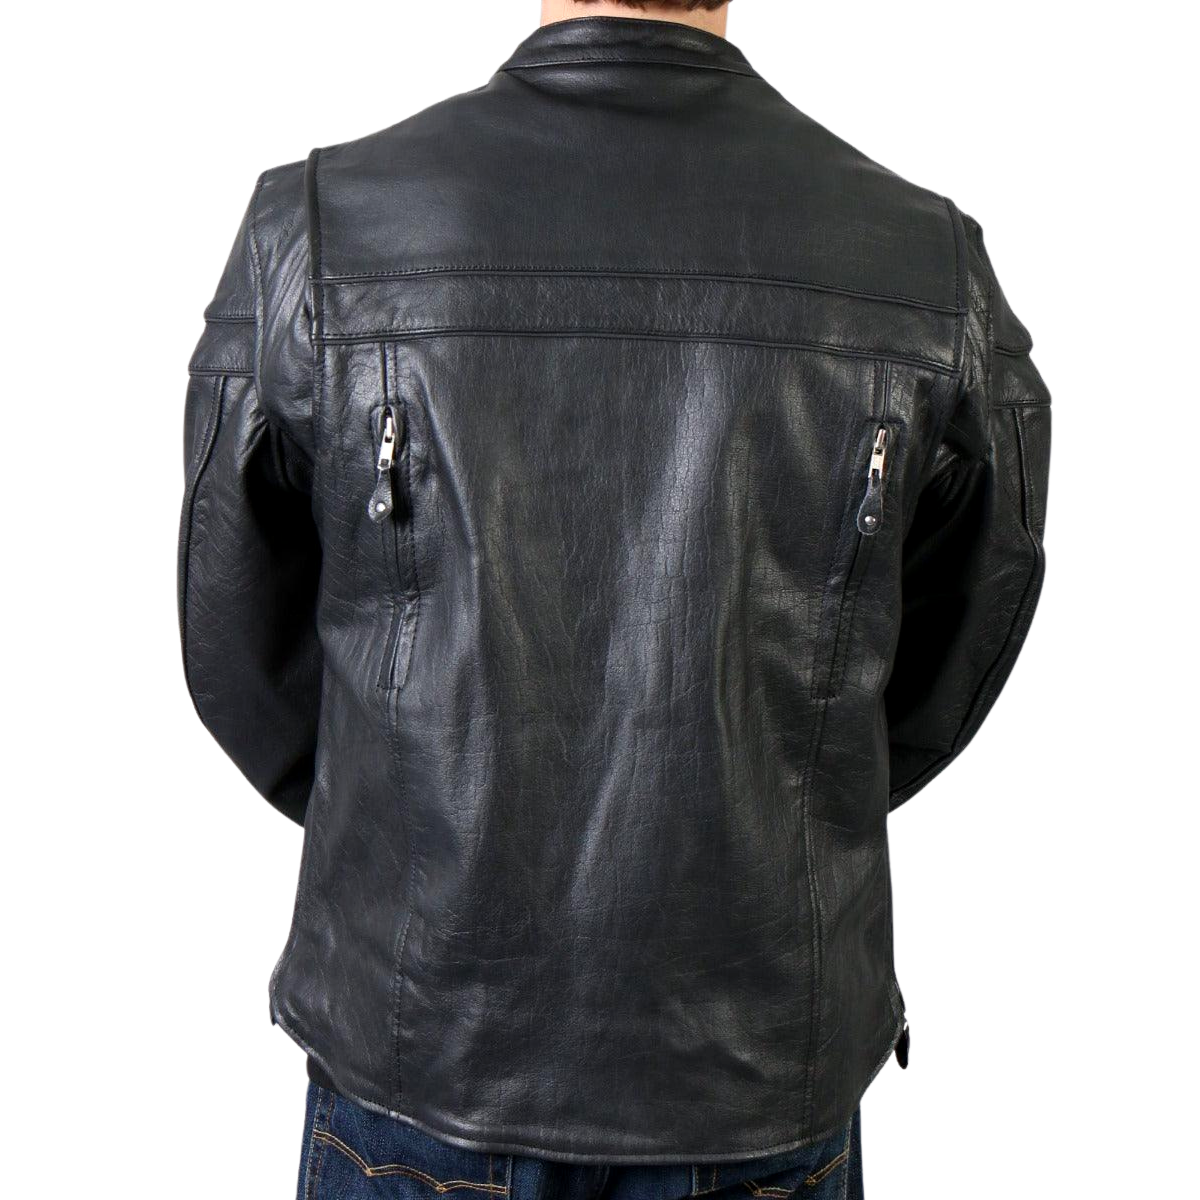 Hot Leathers Men's Leather Jacket with Double Piping